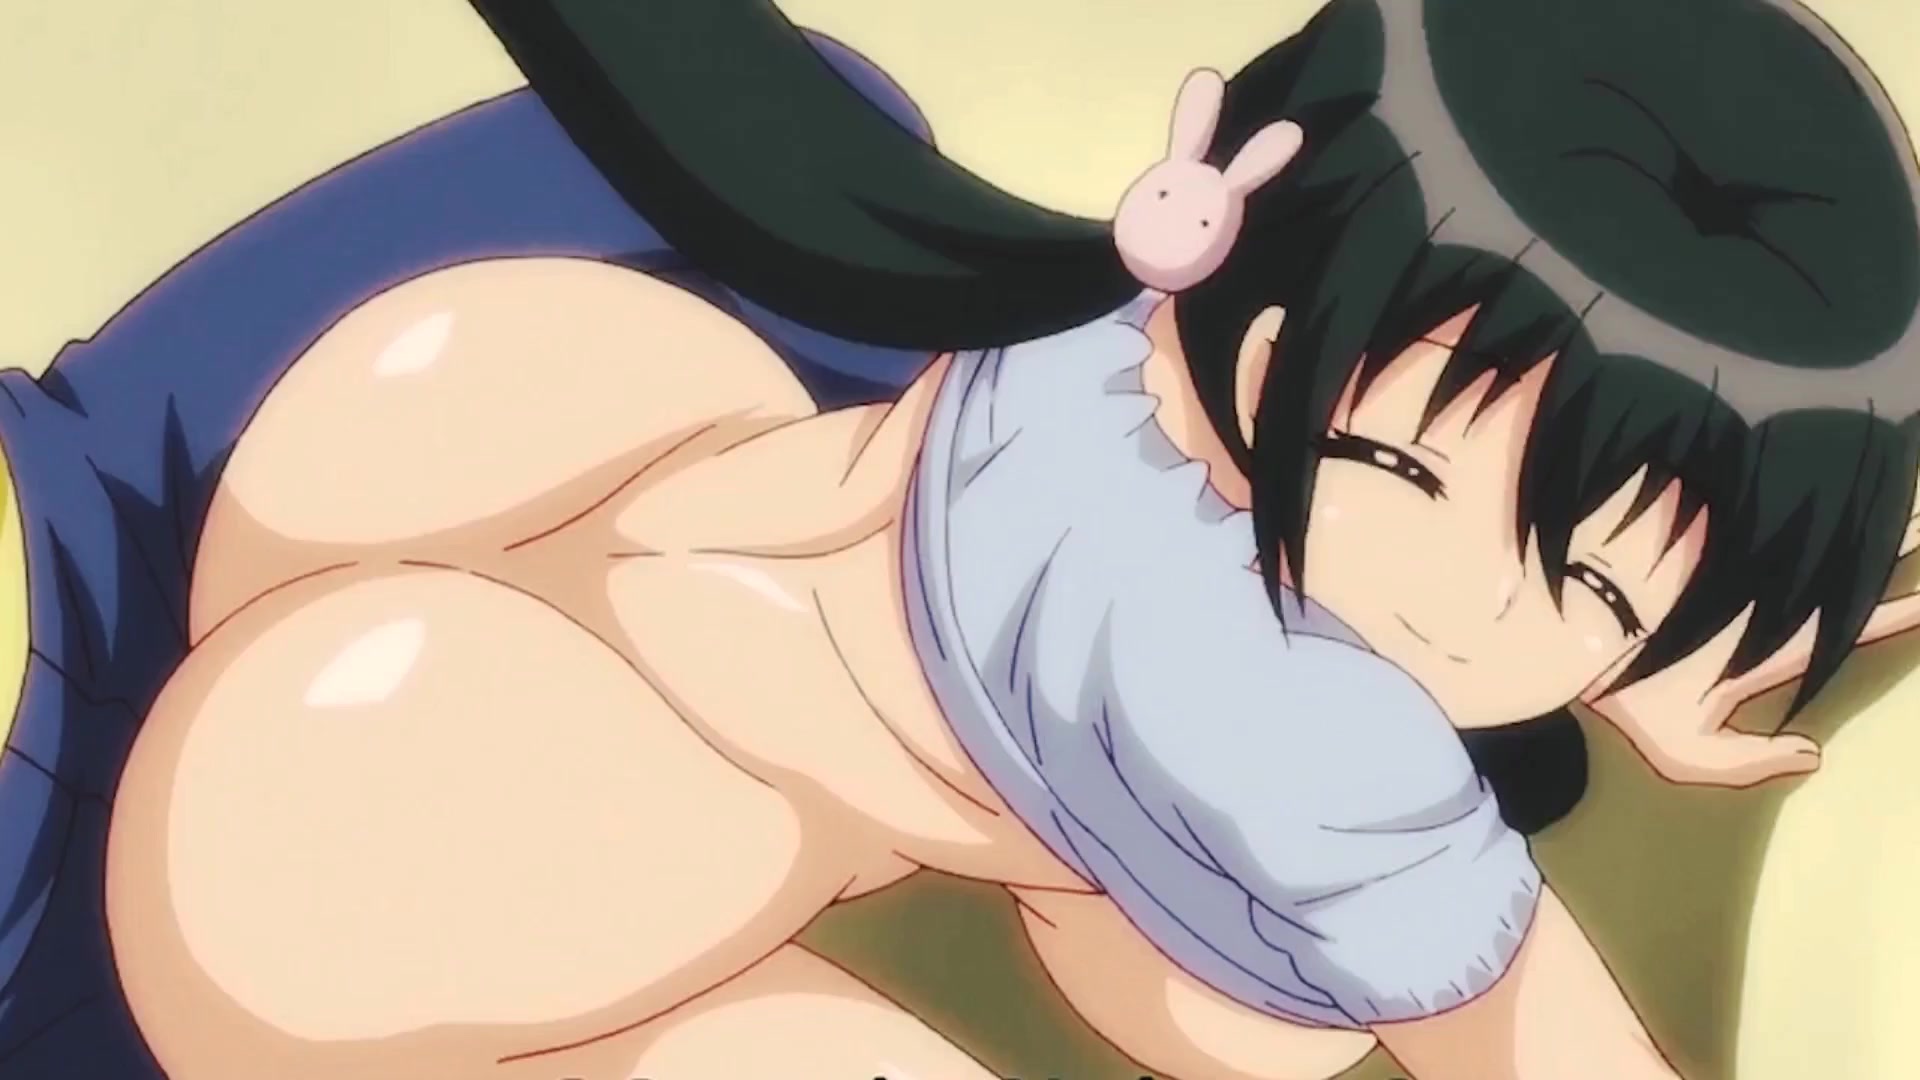 Anime Porn Wallpaper Hd - Youthful Cowgirl Preps her Snatch to be Drilled Stiff | Anime Anime Porn -  uiPorn.com